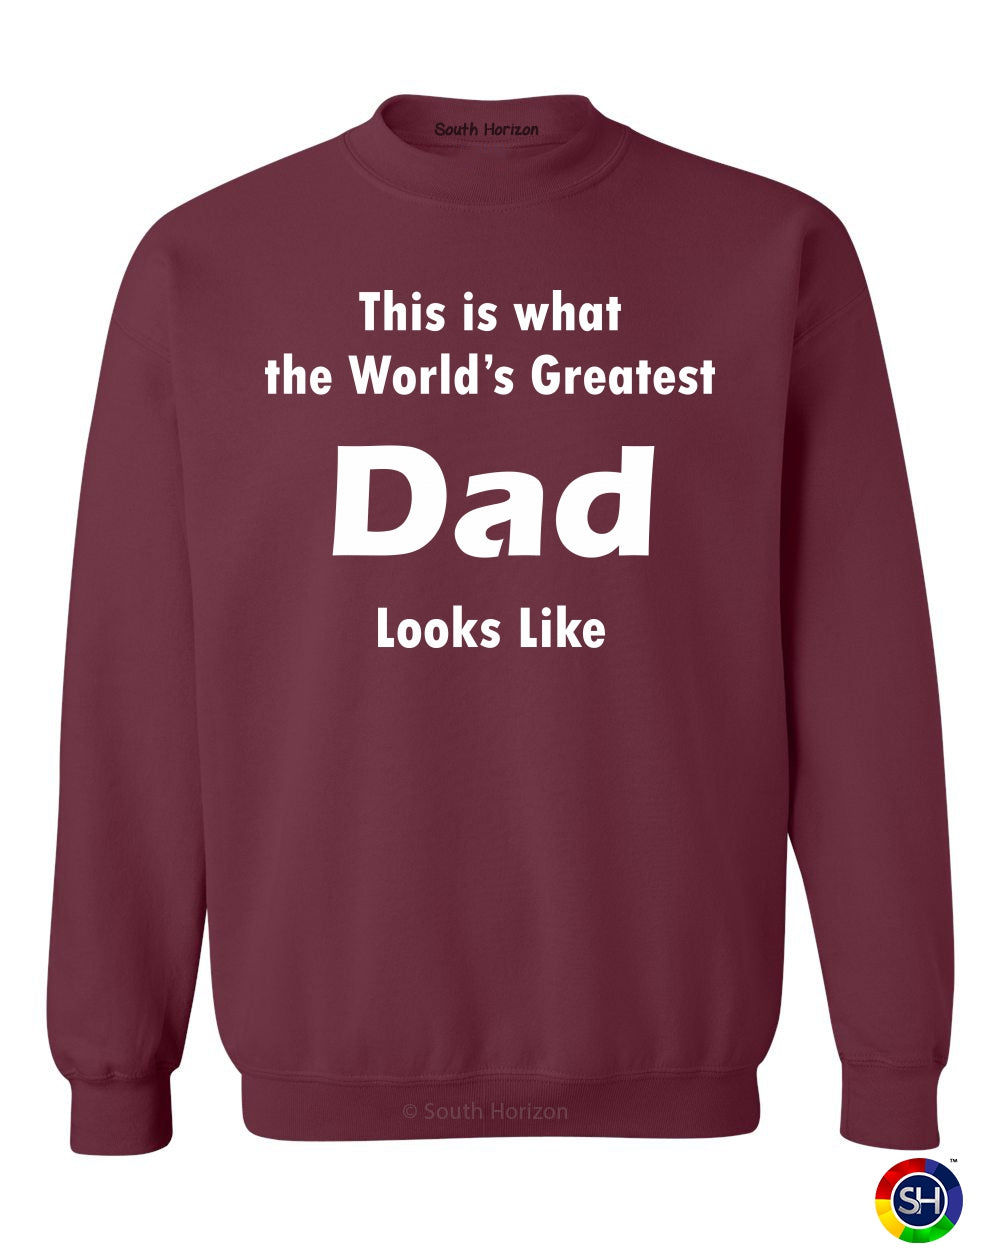 This is what the World's Greatest Dad Looks Like on SweatShirt (#490-11)